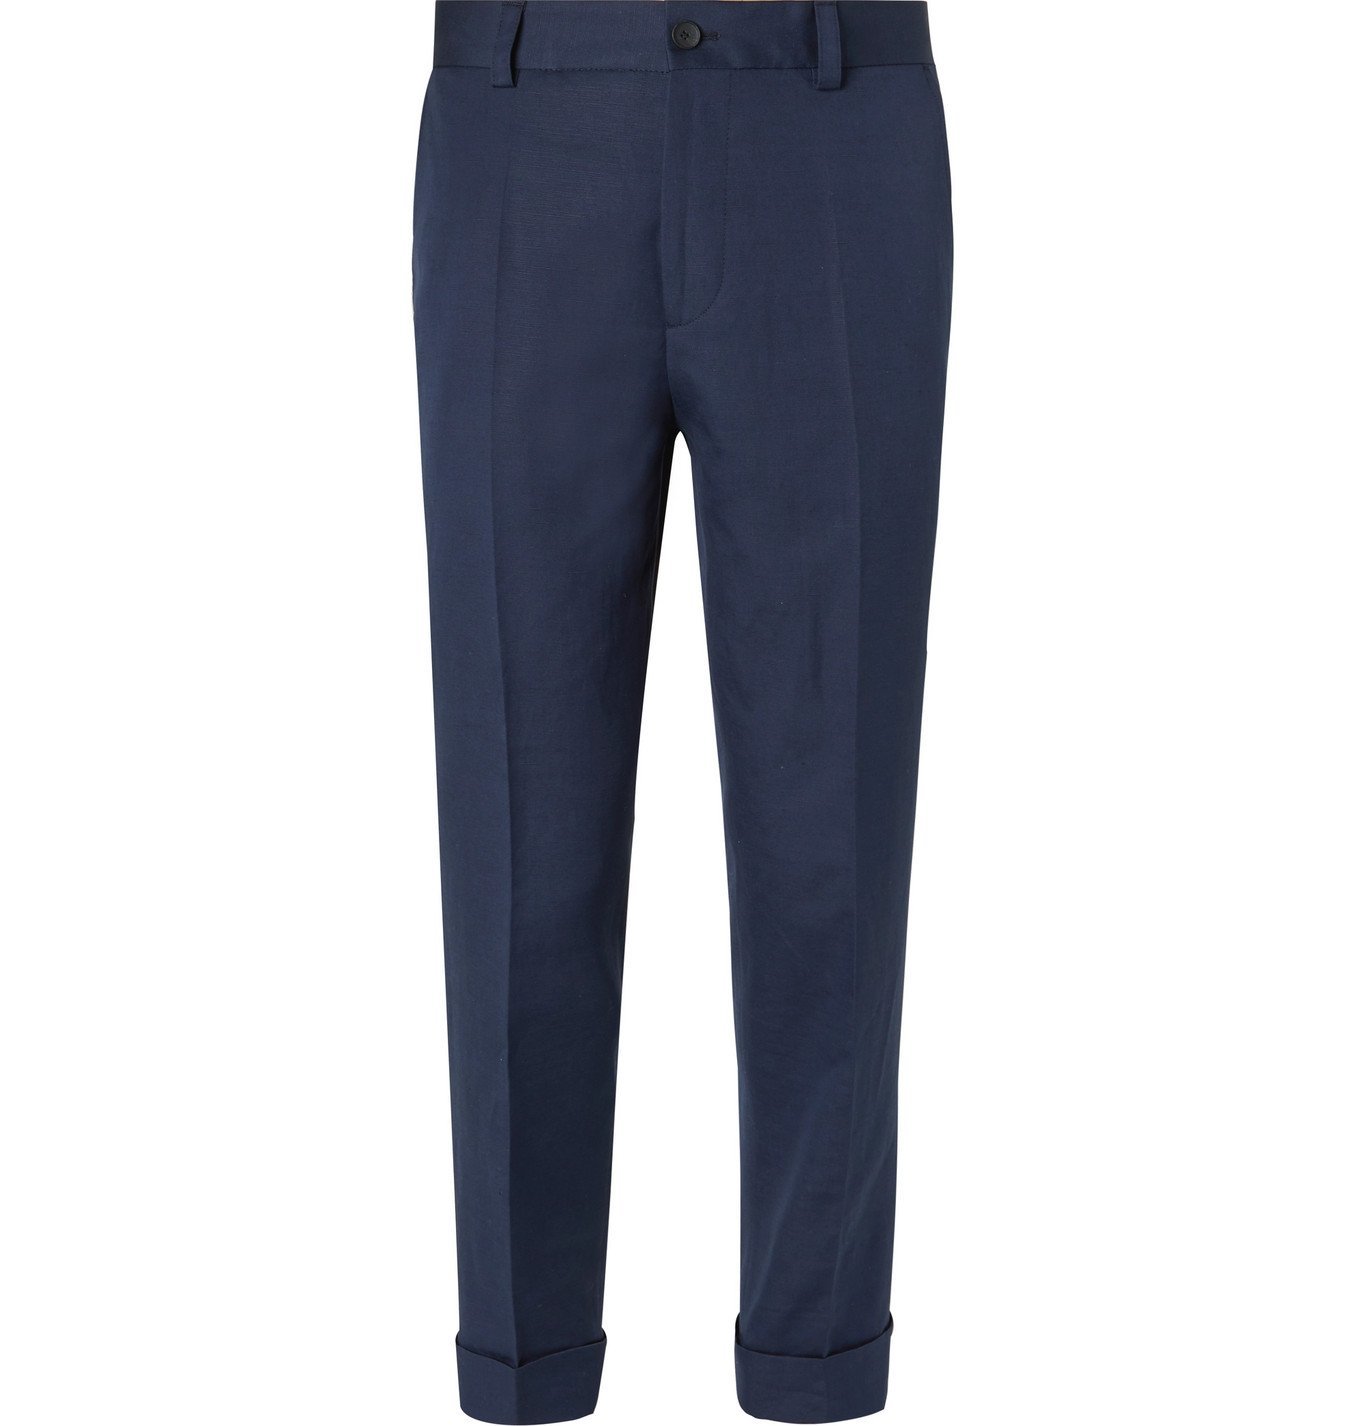 Hugo Boss - Perin Tapered Cotton and Linen-Blend Trousers - Blue Hugo Boss